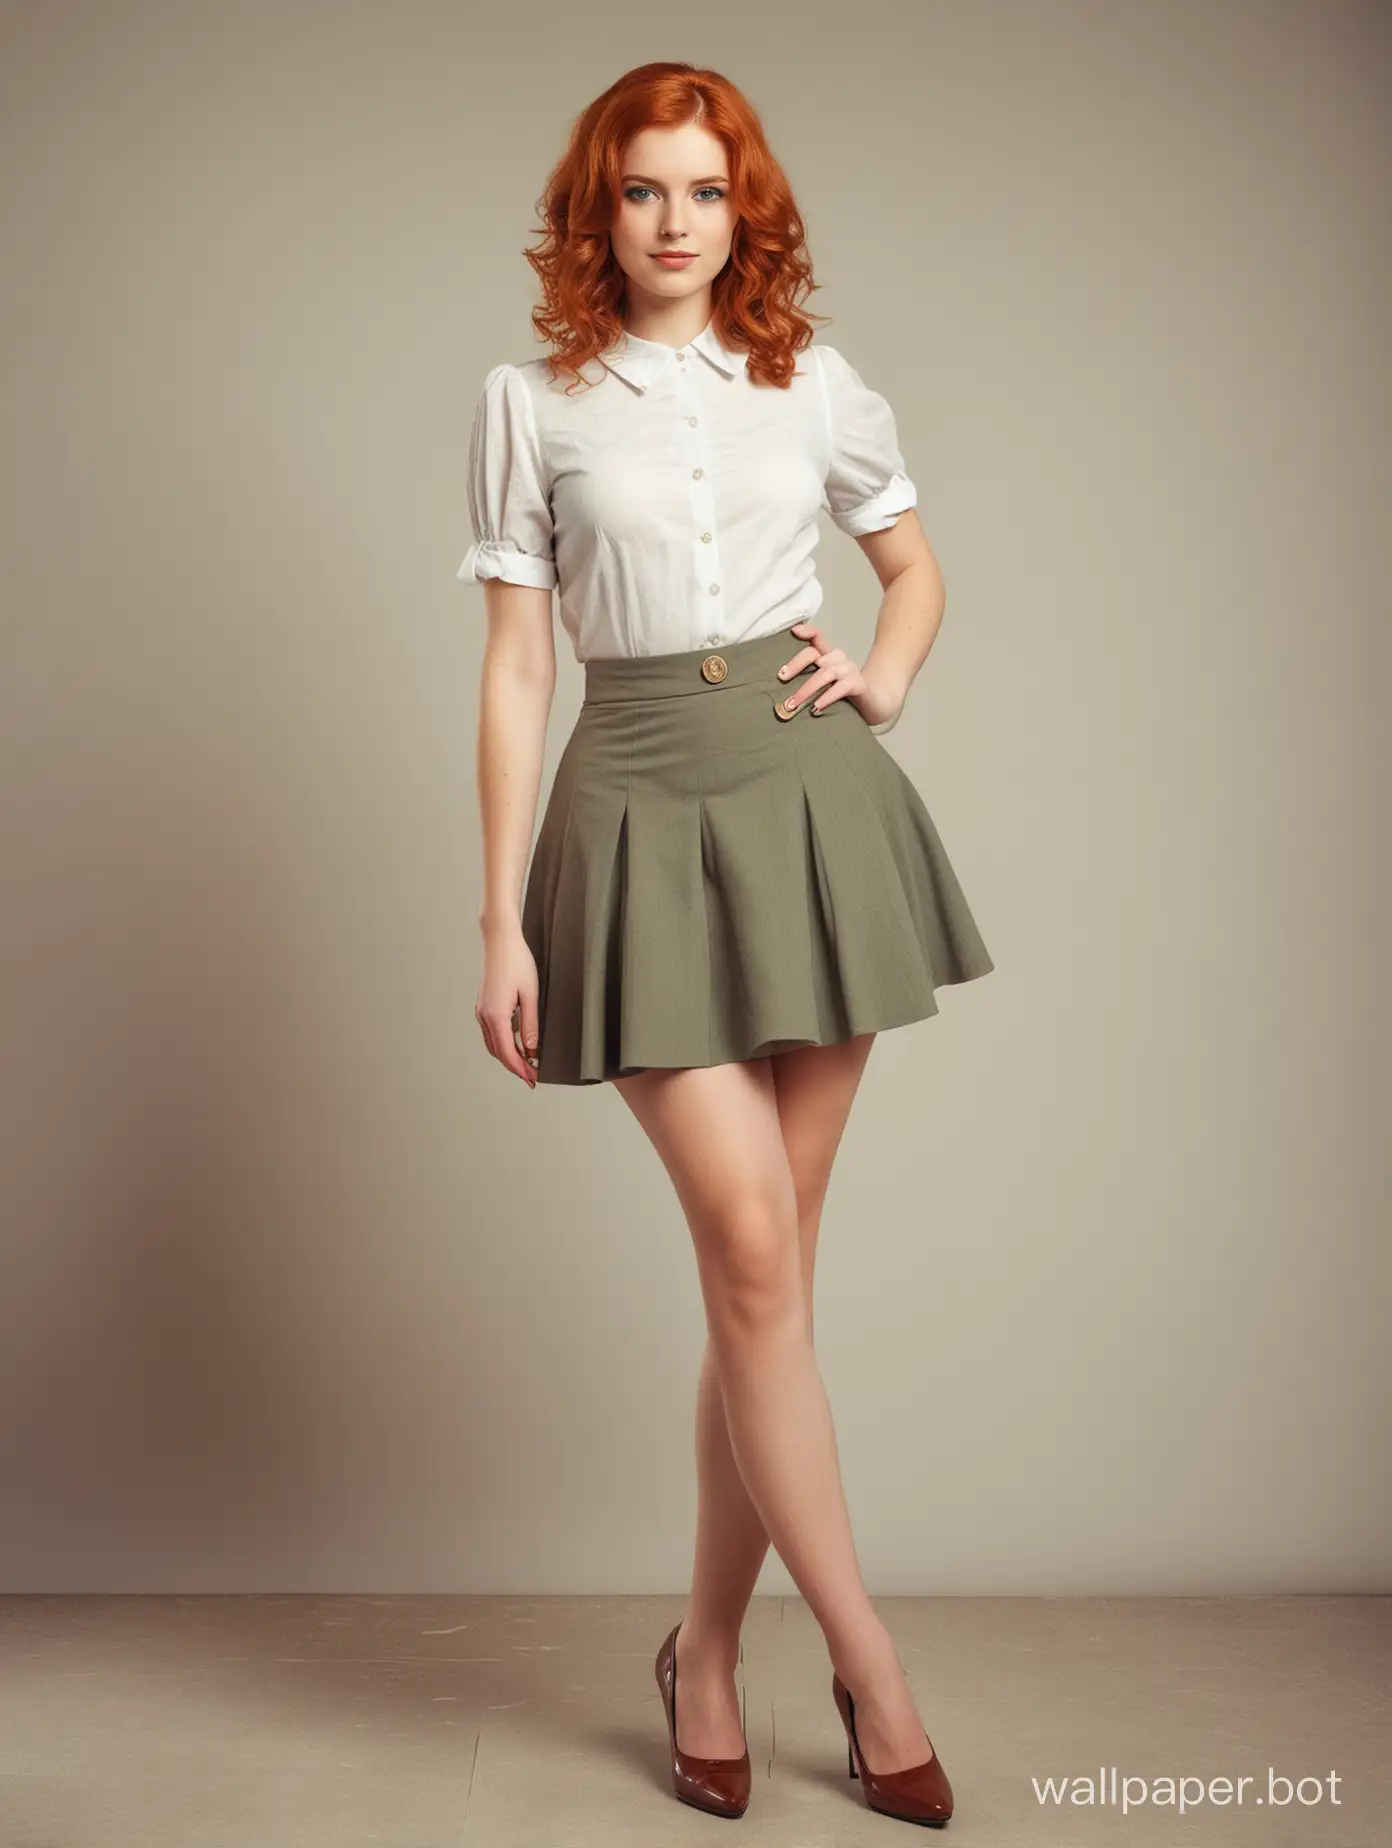 Vintage style. Young lady standing full body. Redhead with green eyes. shortskirt, wadge heels